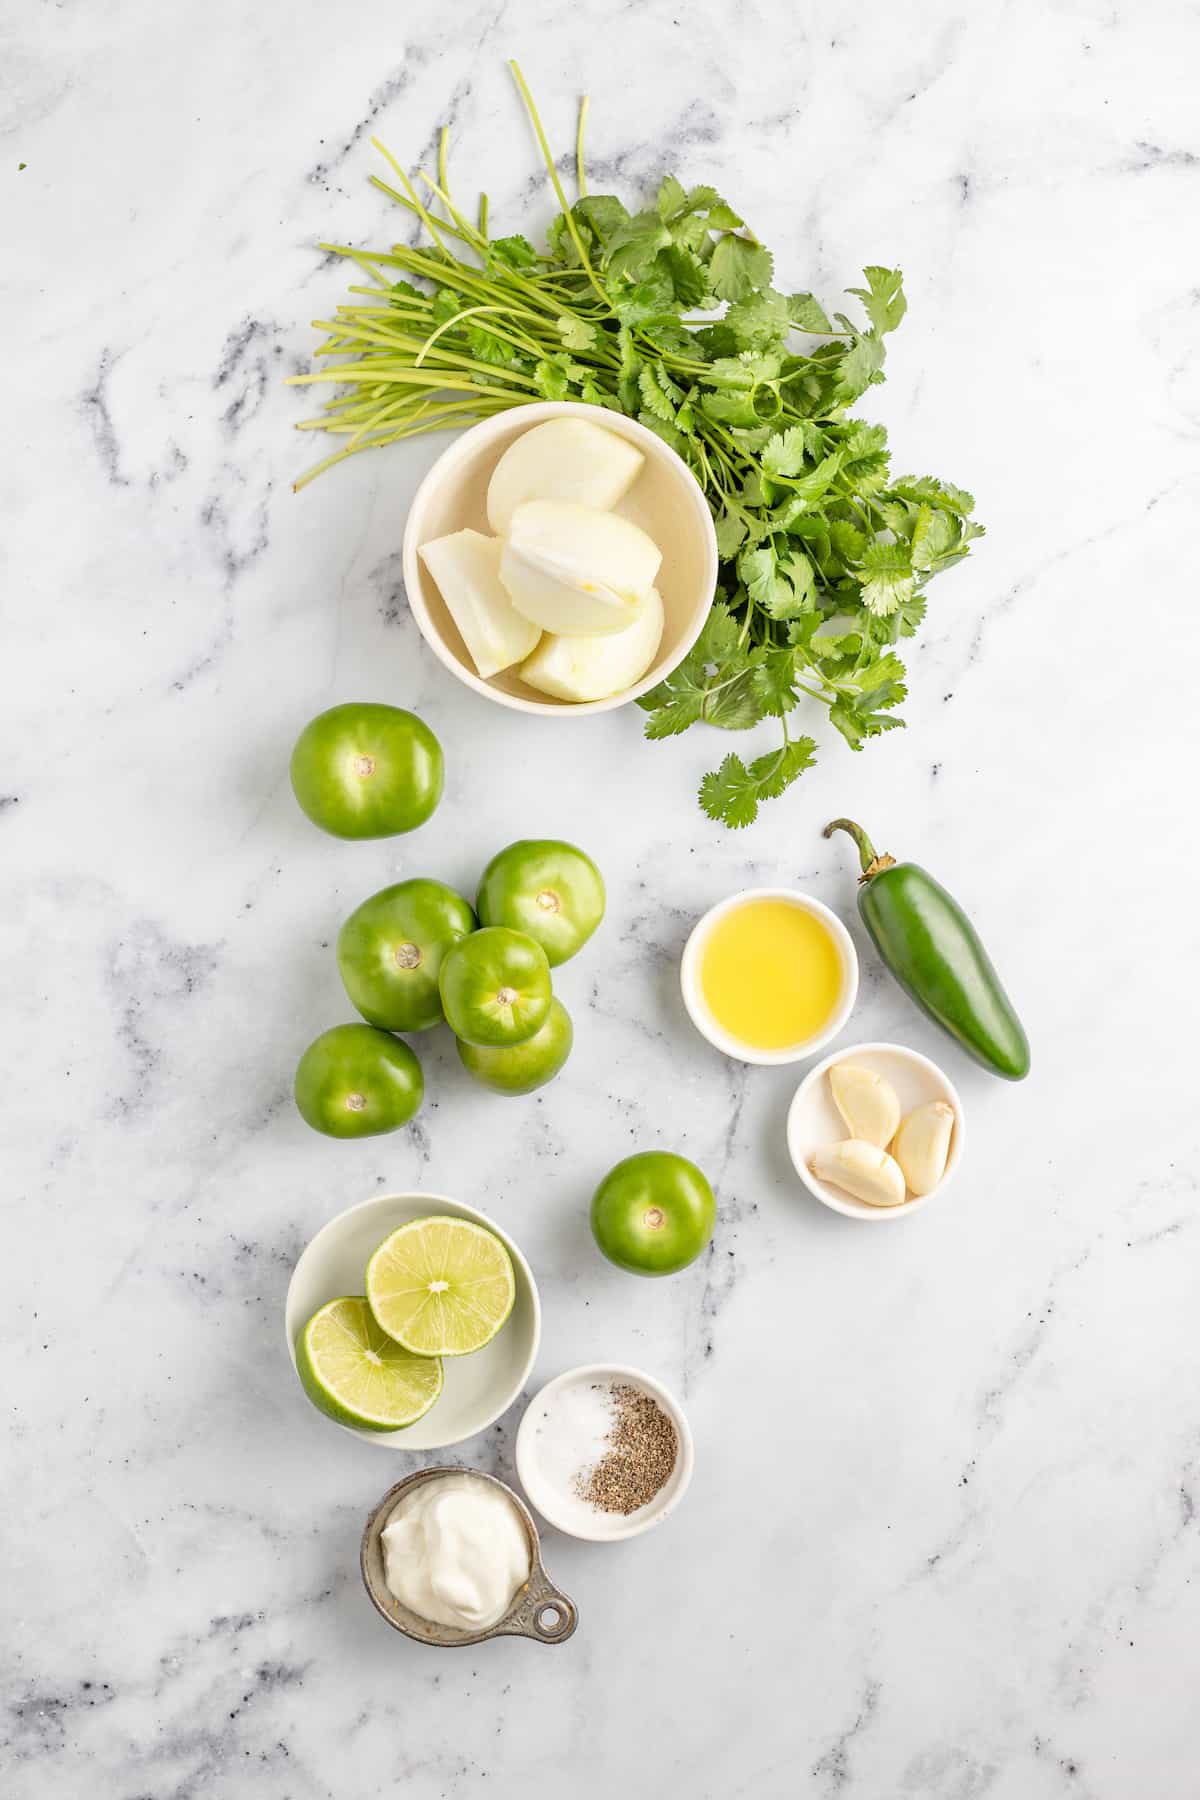 limes, cilantro, tomatillos, jalapeno, and other ingredient on a marble countertop